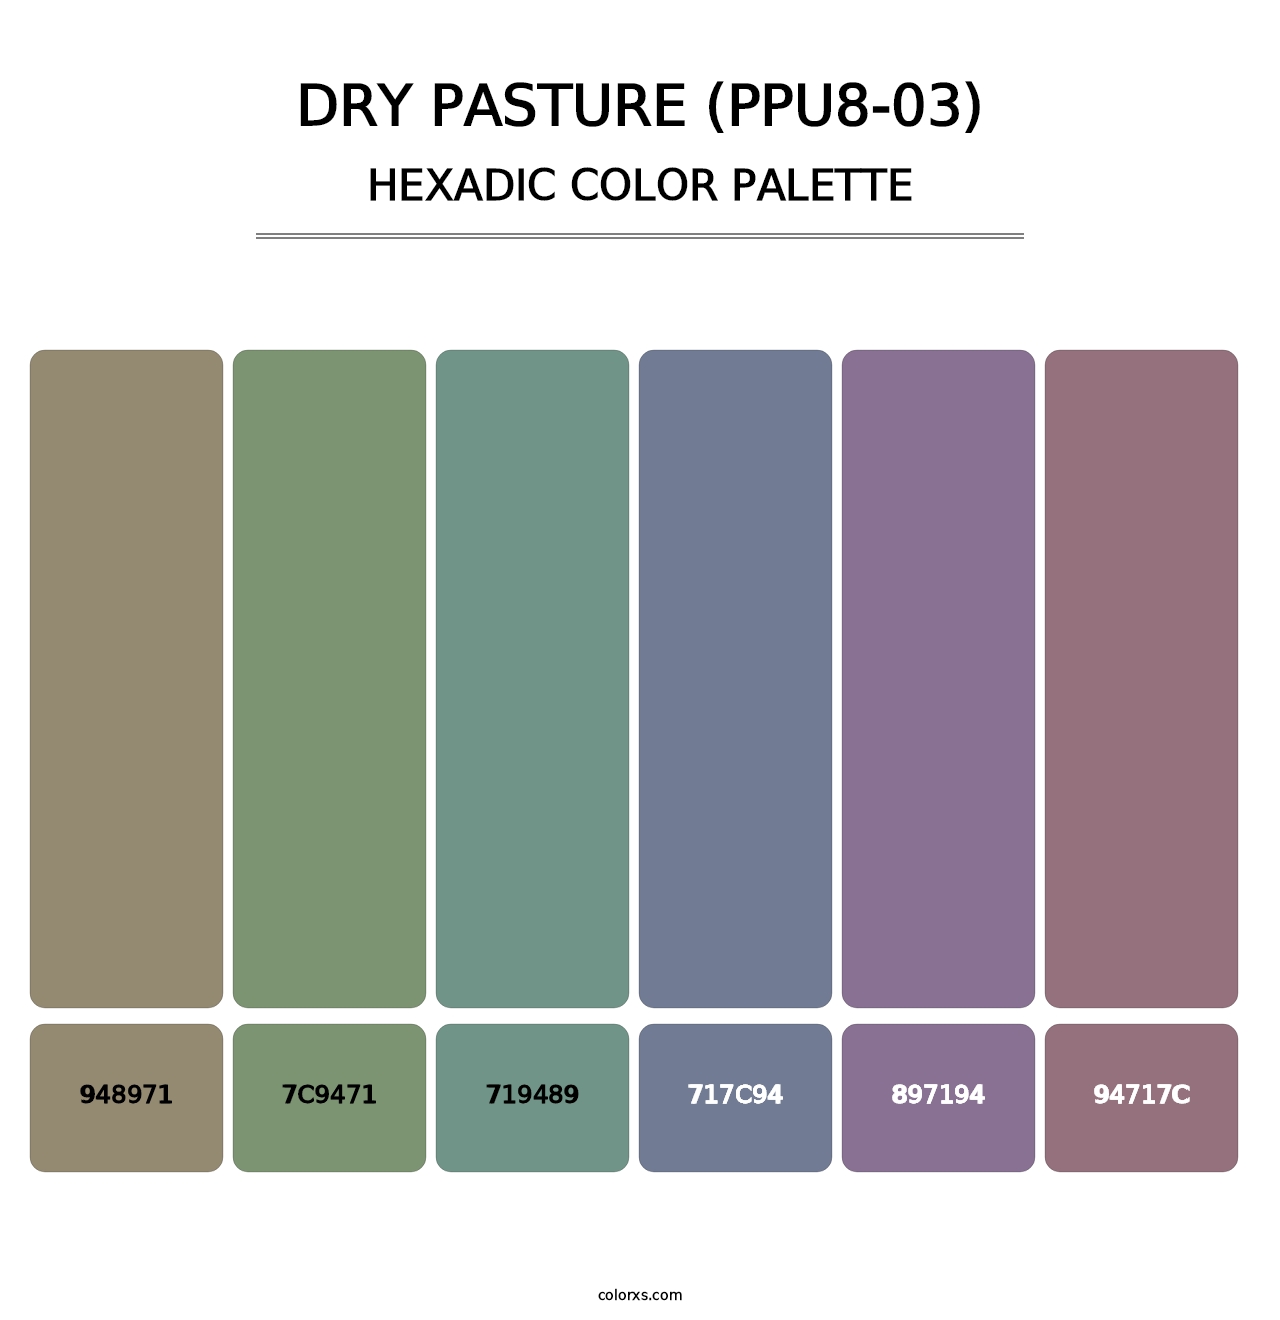 Dry Pasture (PPU8-03) - Hexadic Color Palette